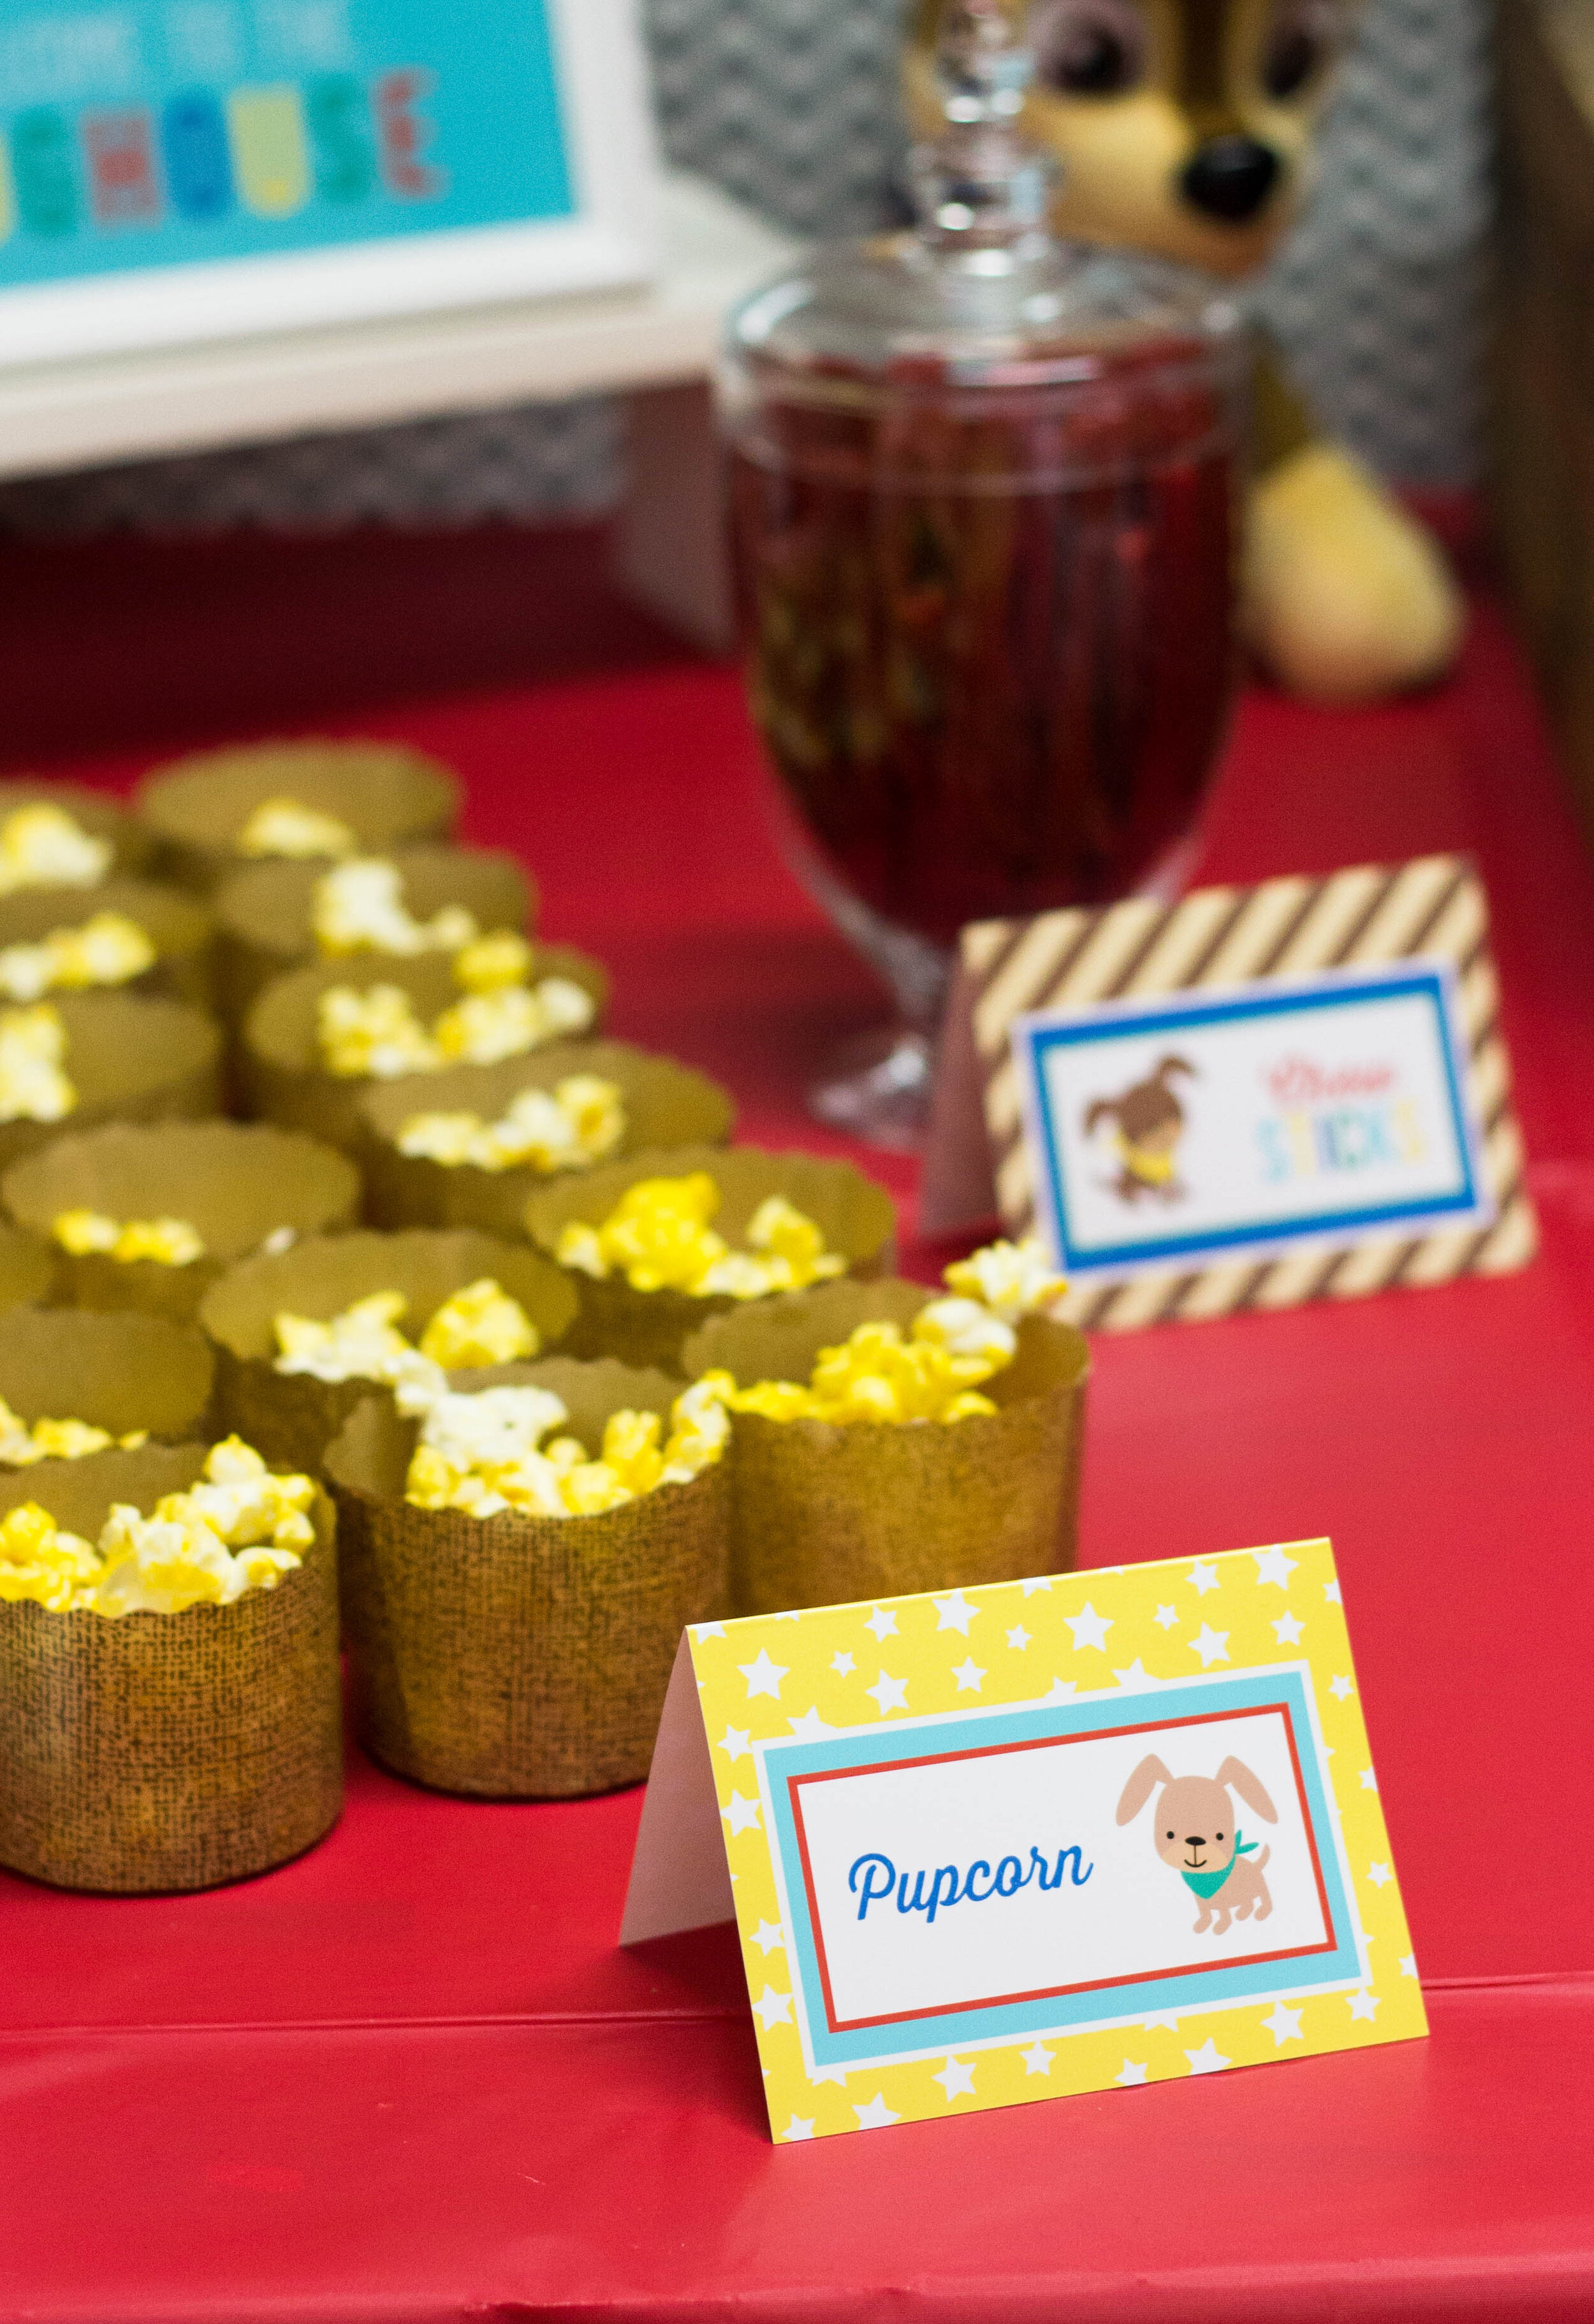 Pupcorn Puppy Pawty Food Card | merry-grace.com